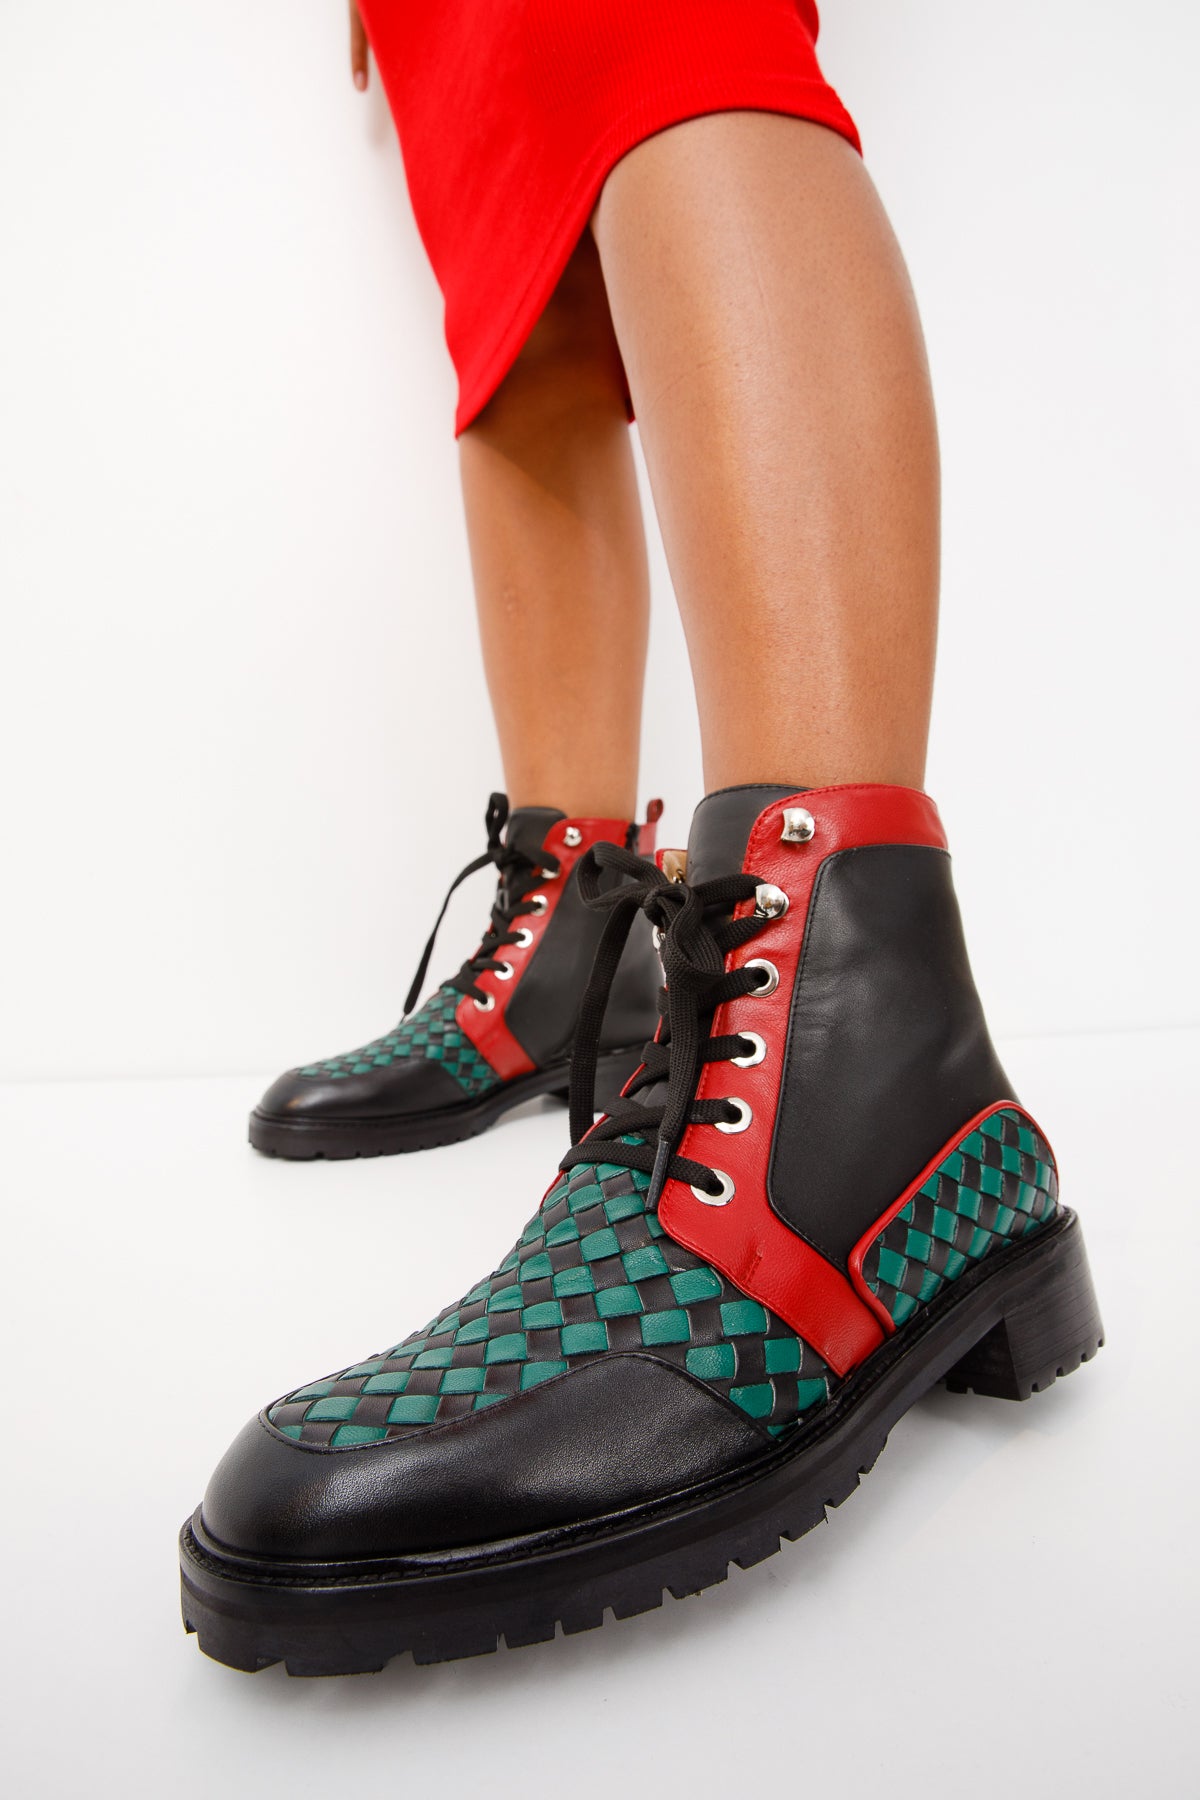 The Black River Black Handwoven Leather Ankle Women Boot